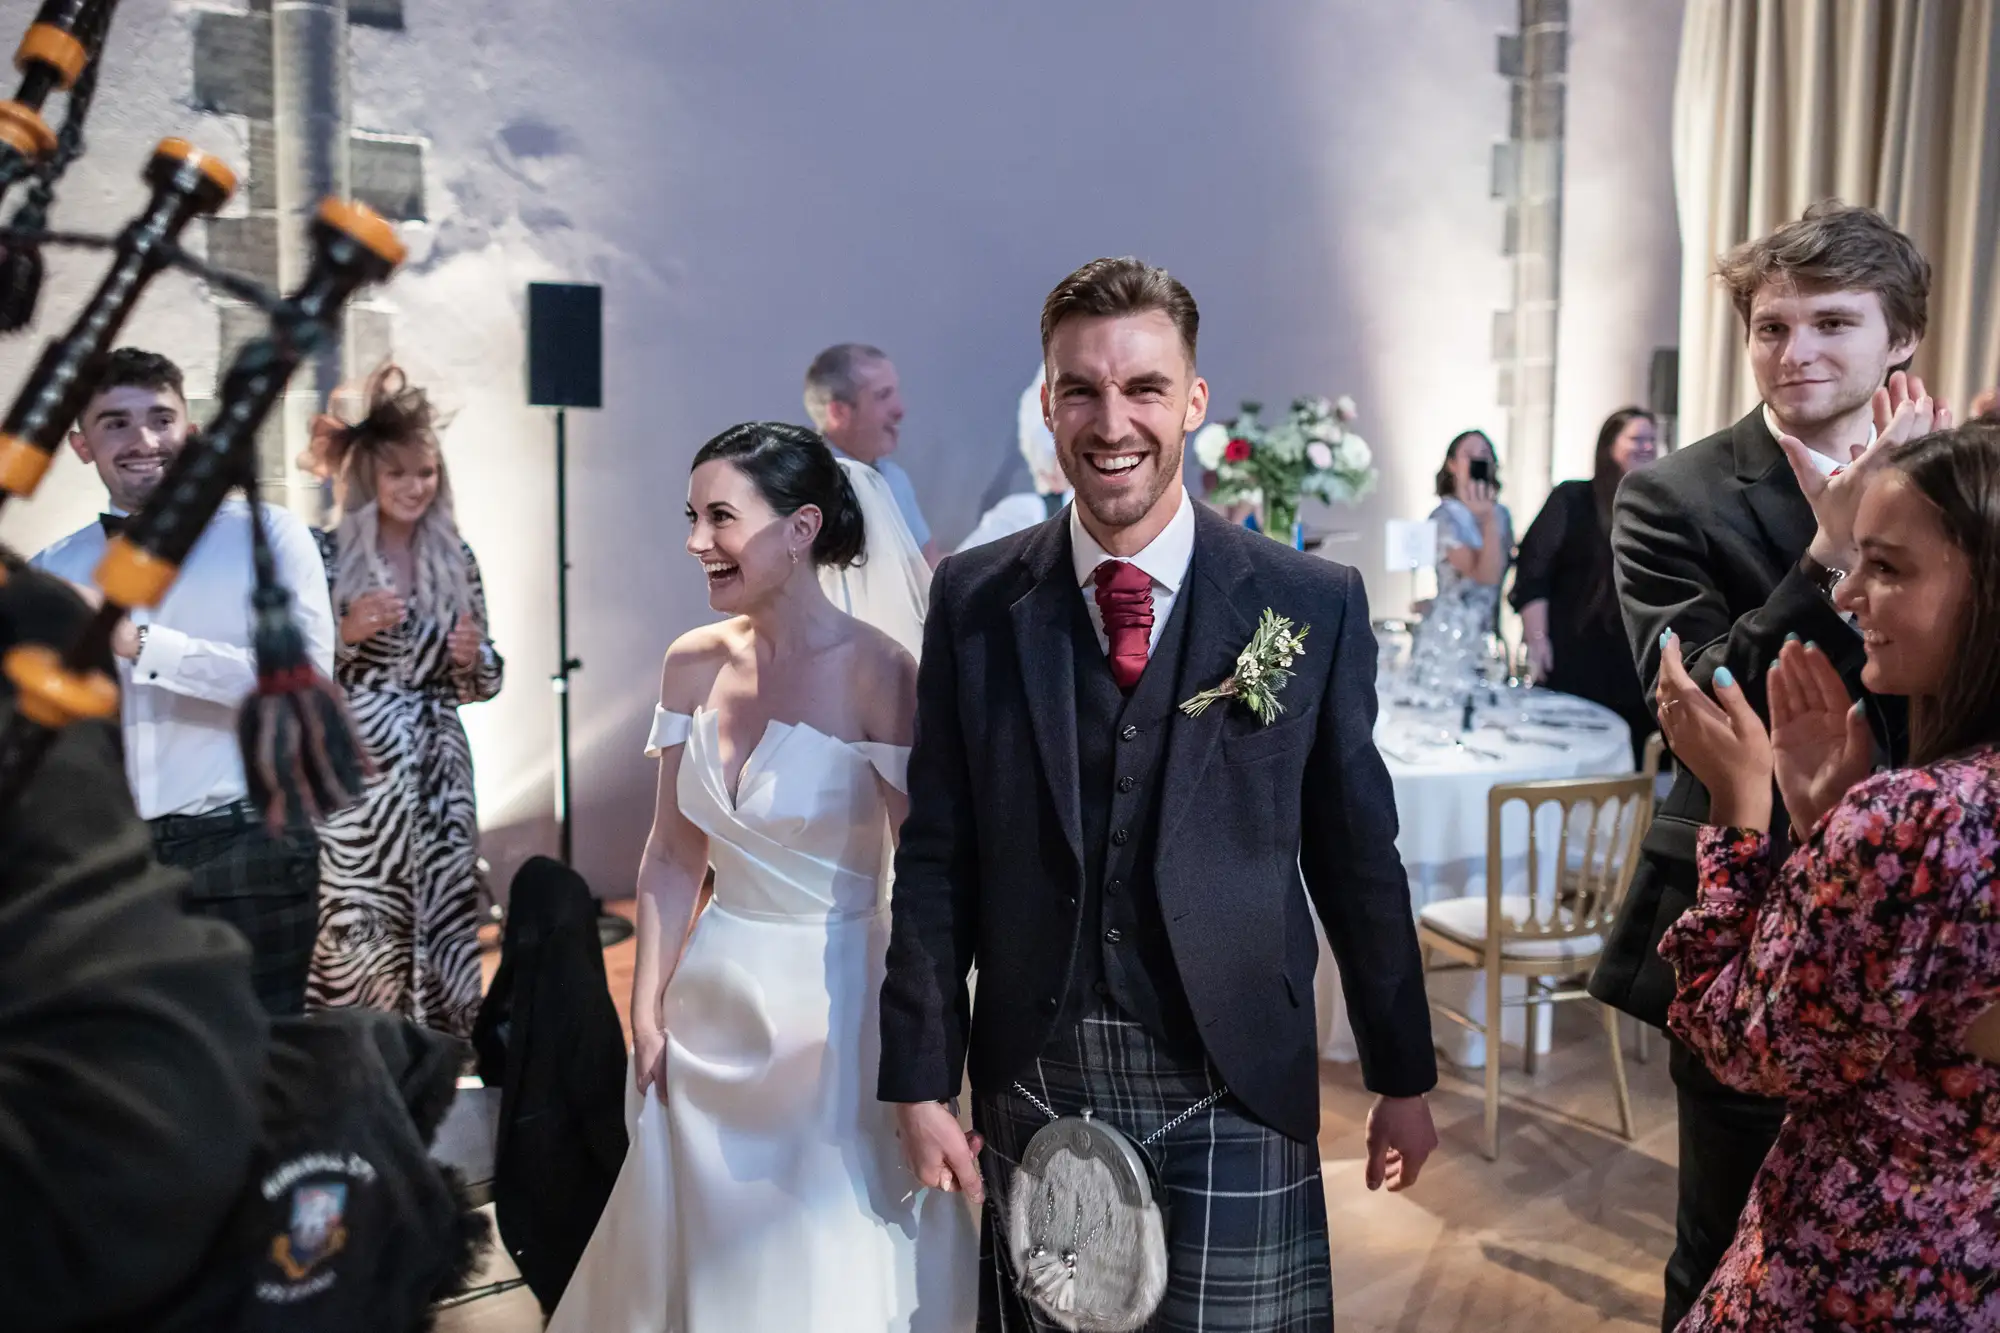 A newlywed couple walking joyfully through a clapping crowd, the groom in a tartan kilt and the bride in a white dress.